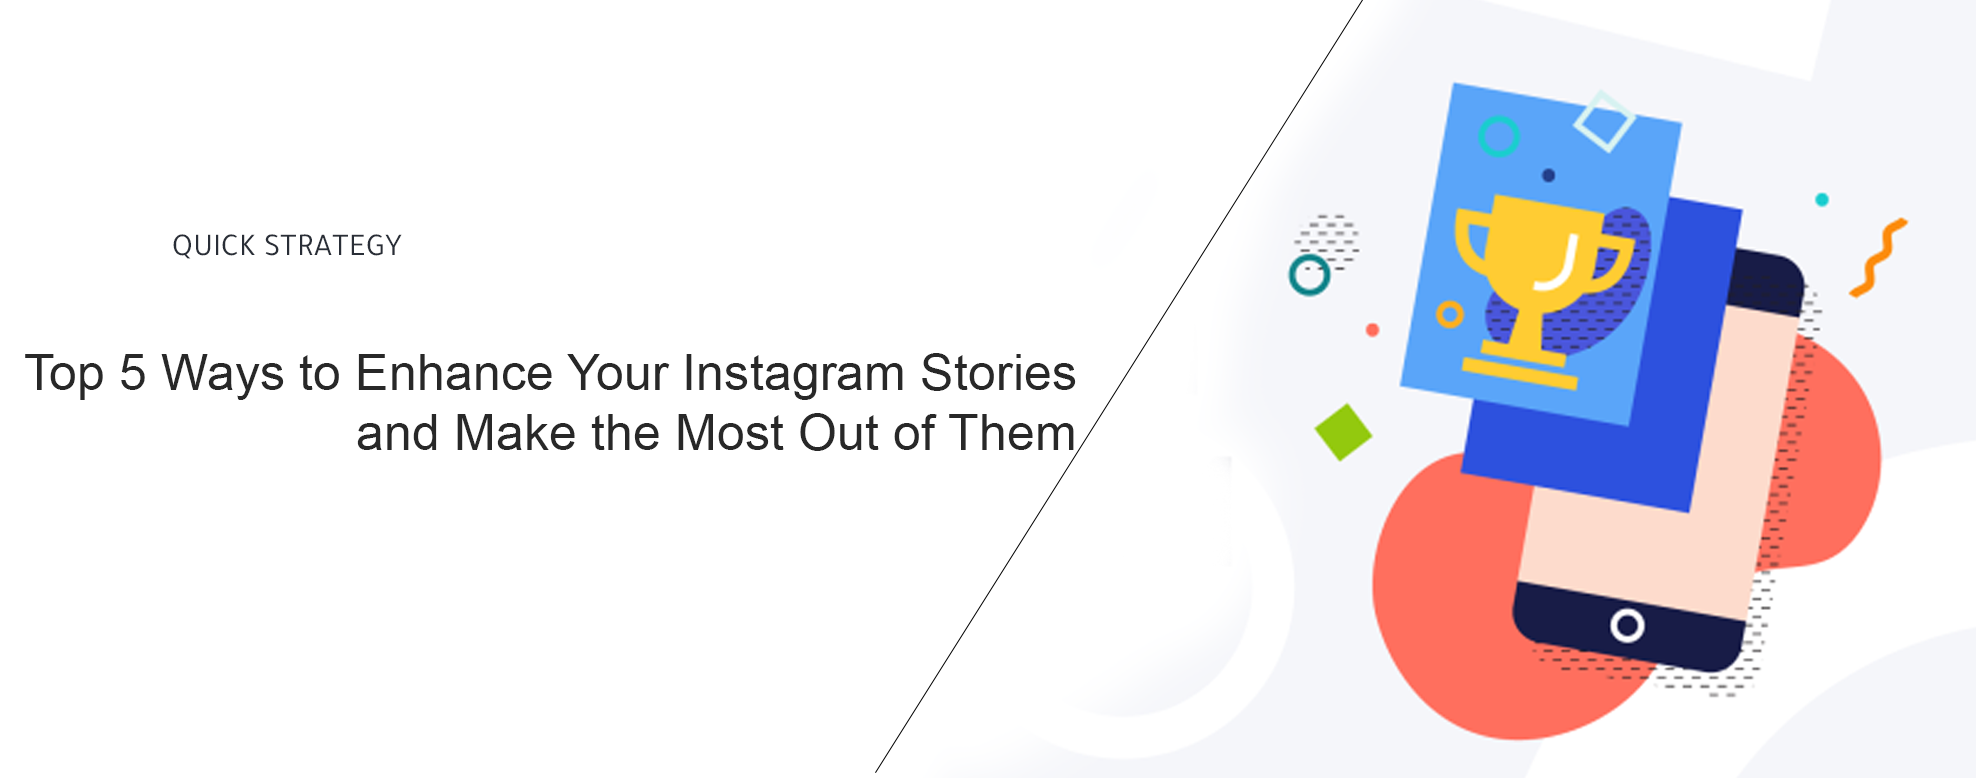 Top 5 Ways to Enhance Your Instagram Stories and Make the Most Out of Them